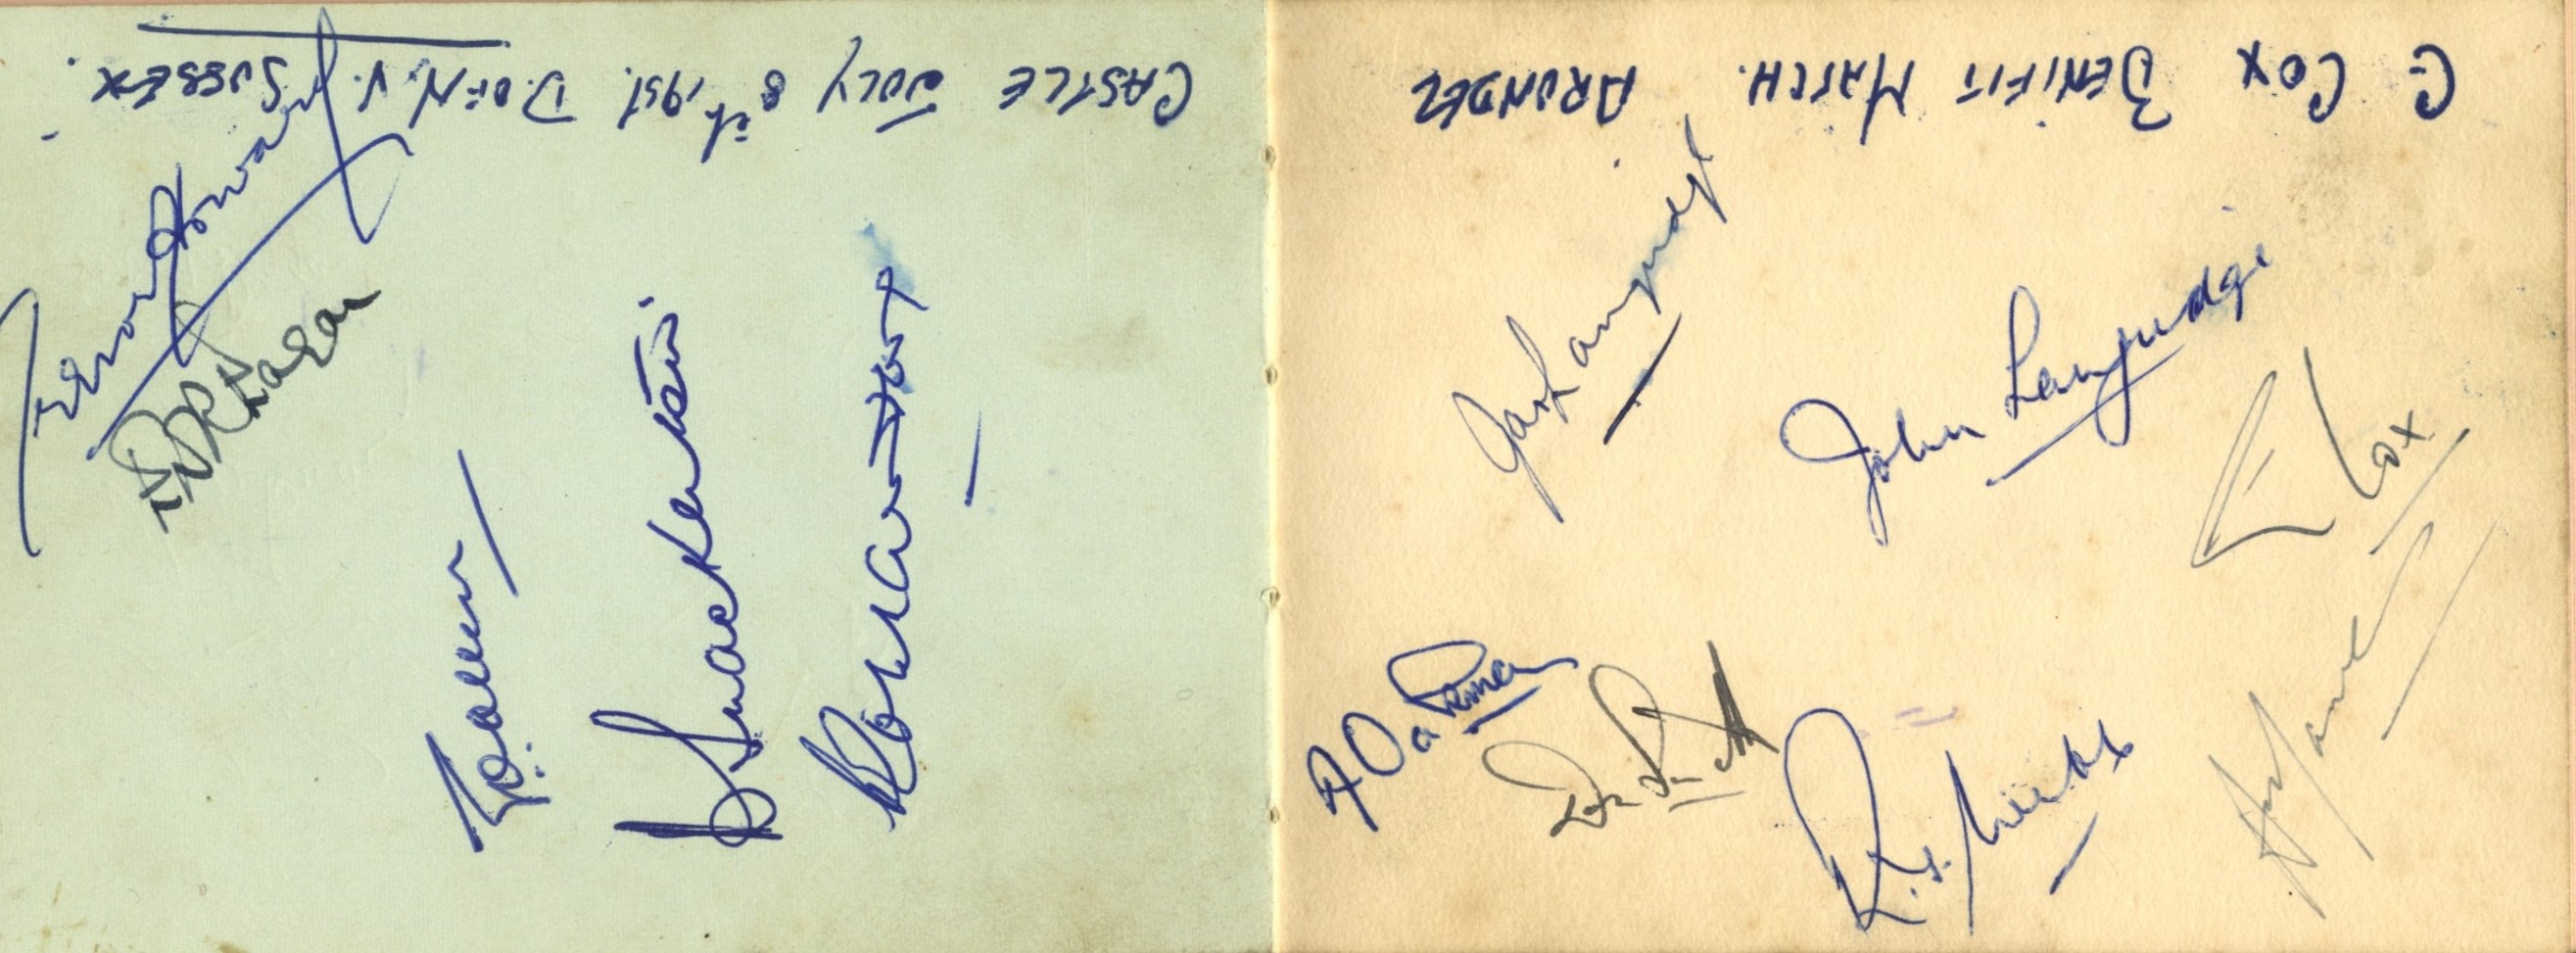 CRICKET: An autograph album containing over 35 signatures by various cricketers including Gubby